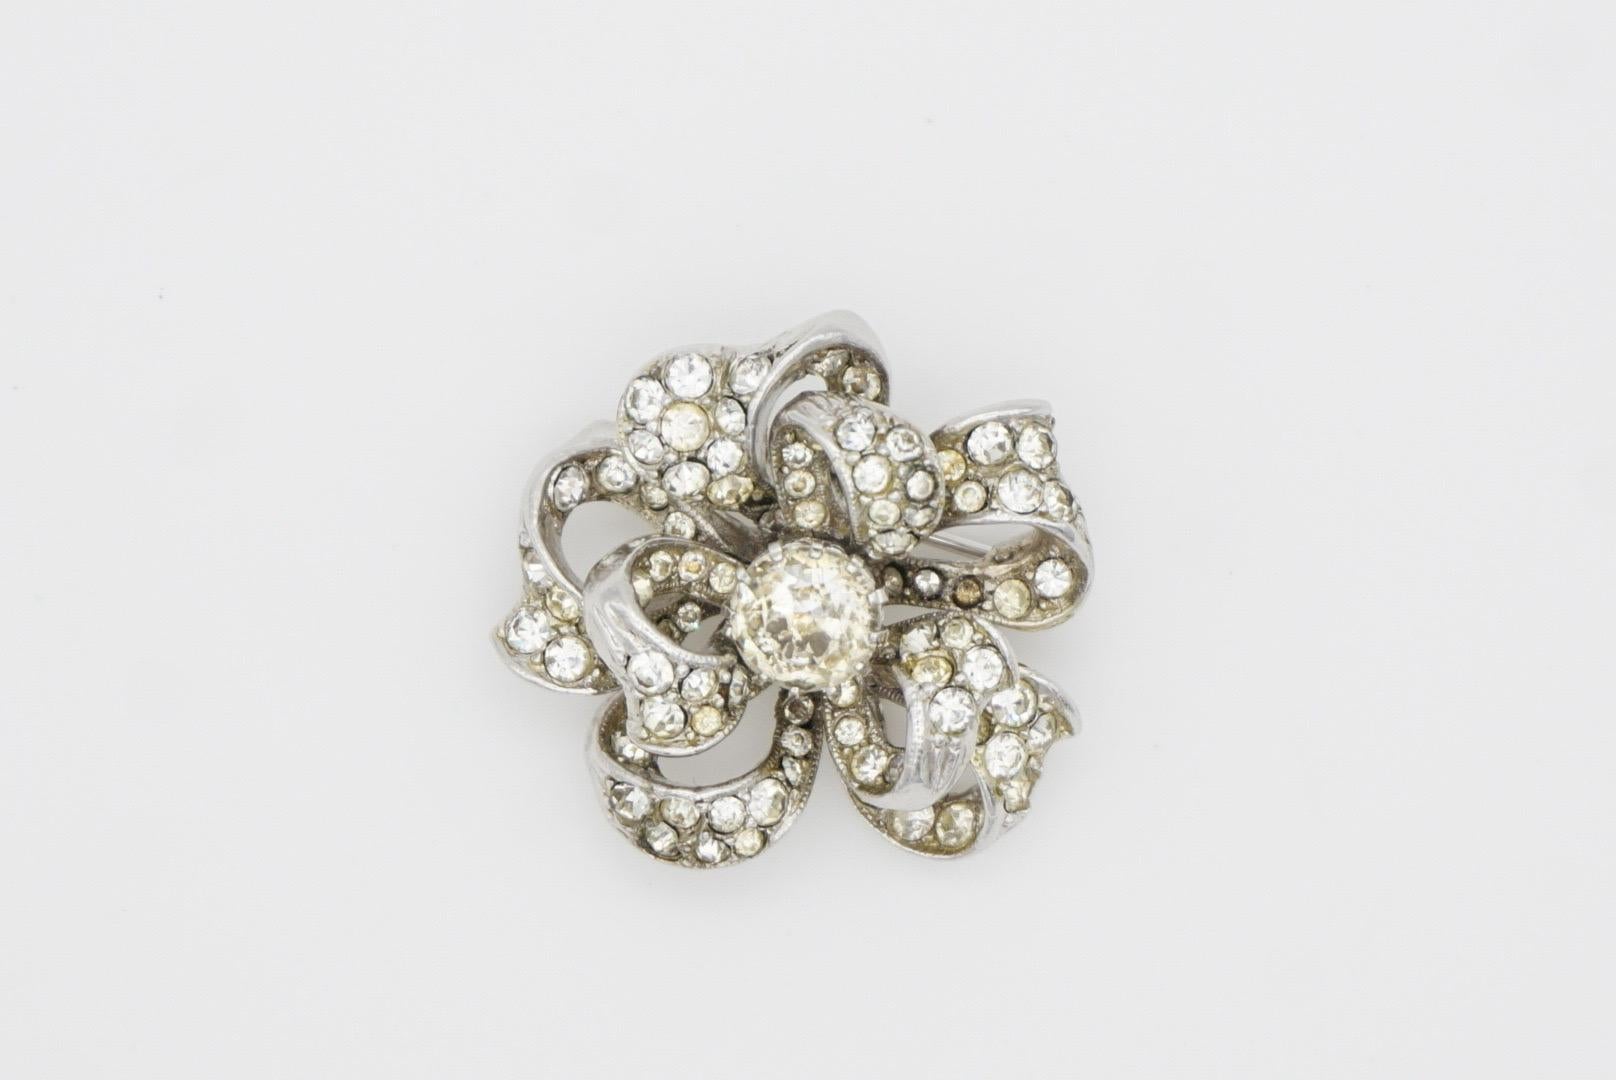 Christian Dior by Mitchel Maer for Christian Dior for Christian Dior for Christian Dior for Christian Dior by Mitchel Maer for Christian Dior for Christian Dior 1950s Crystals Double Layer Flower Silver Brooch en vente 3